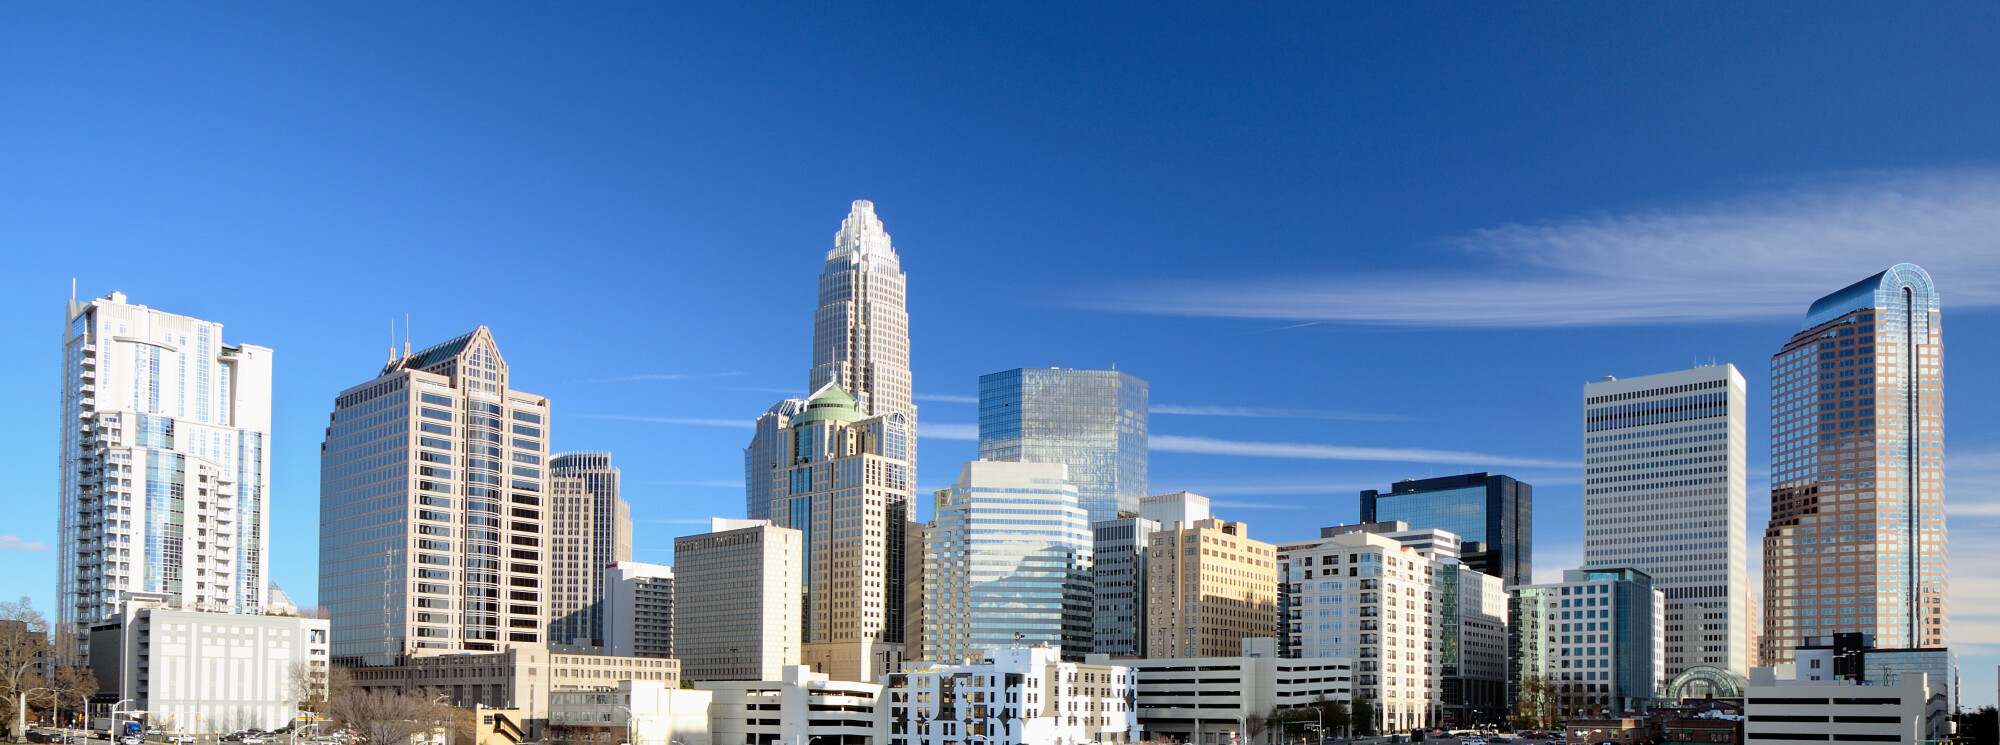 7 Amazing Benefits of Moving to Charlotte, NC